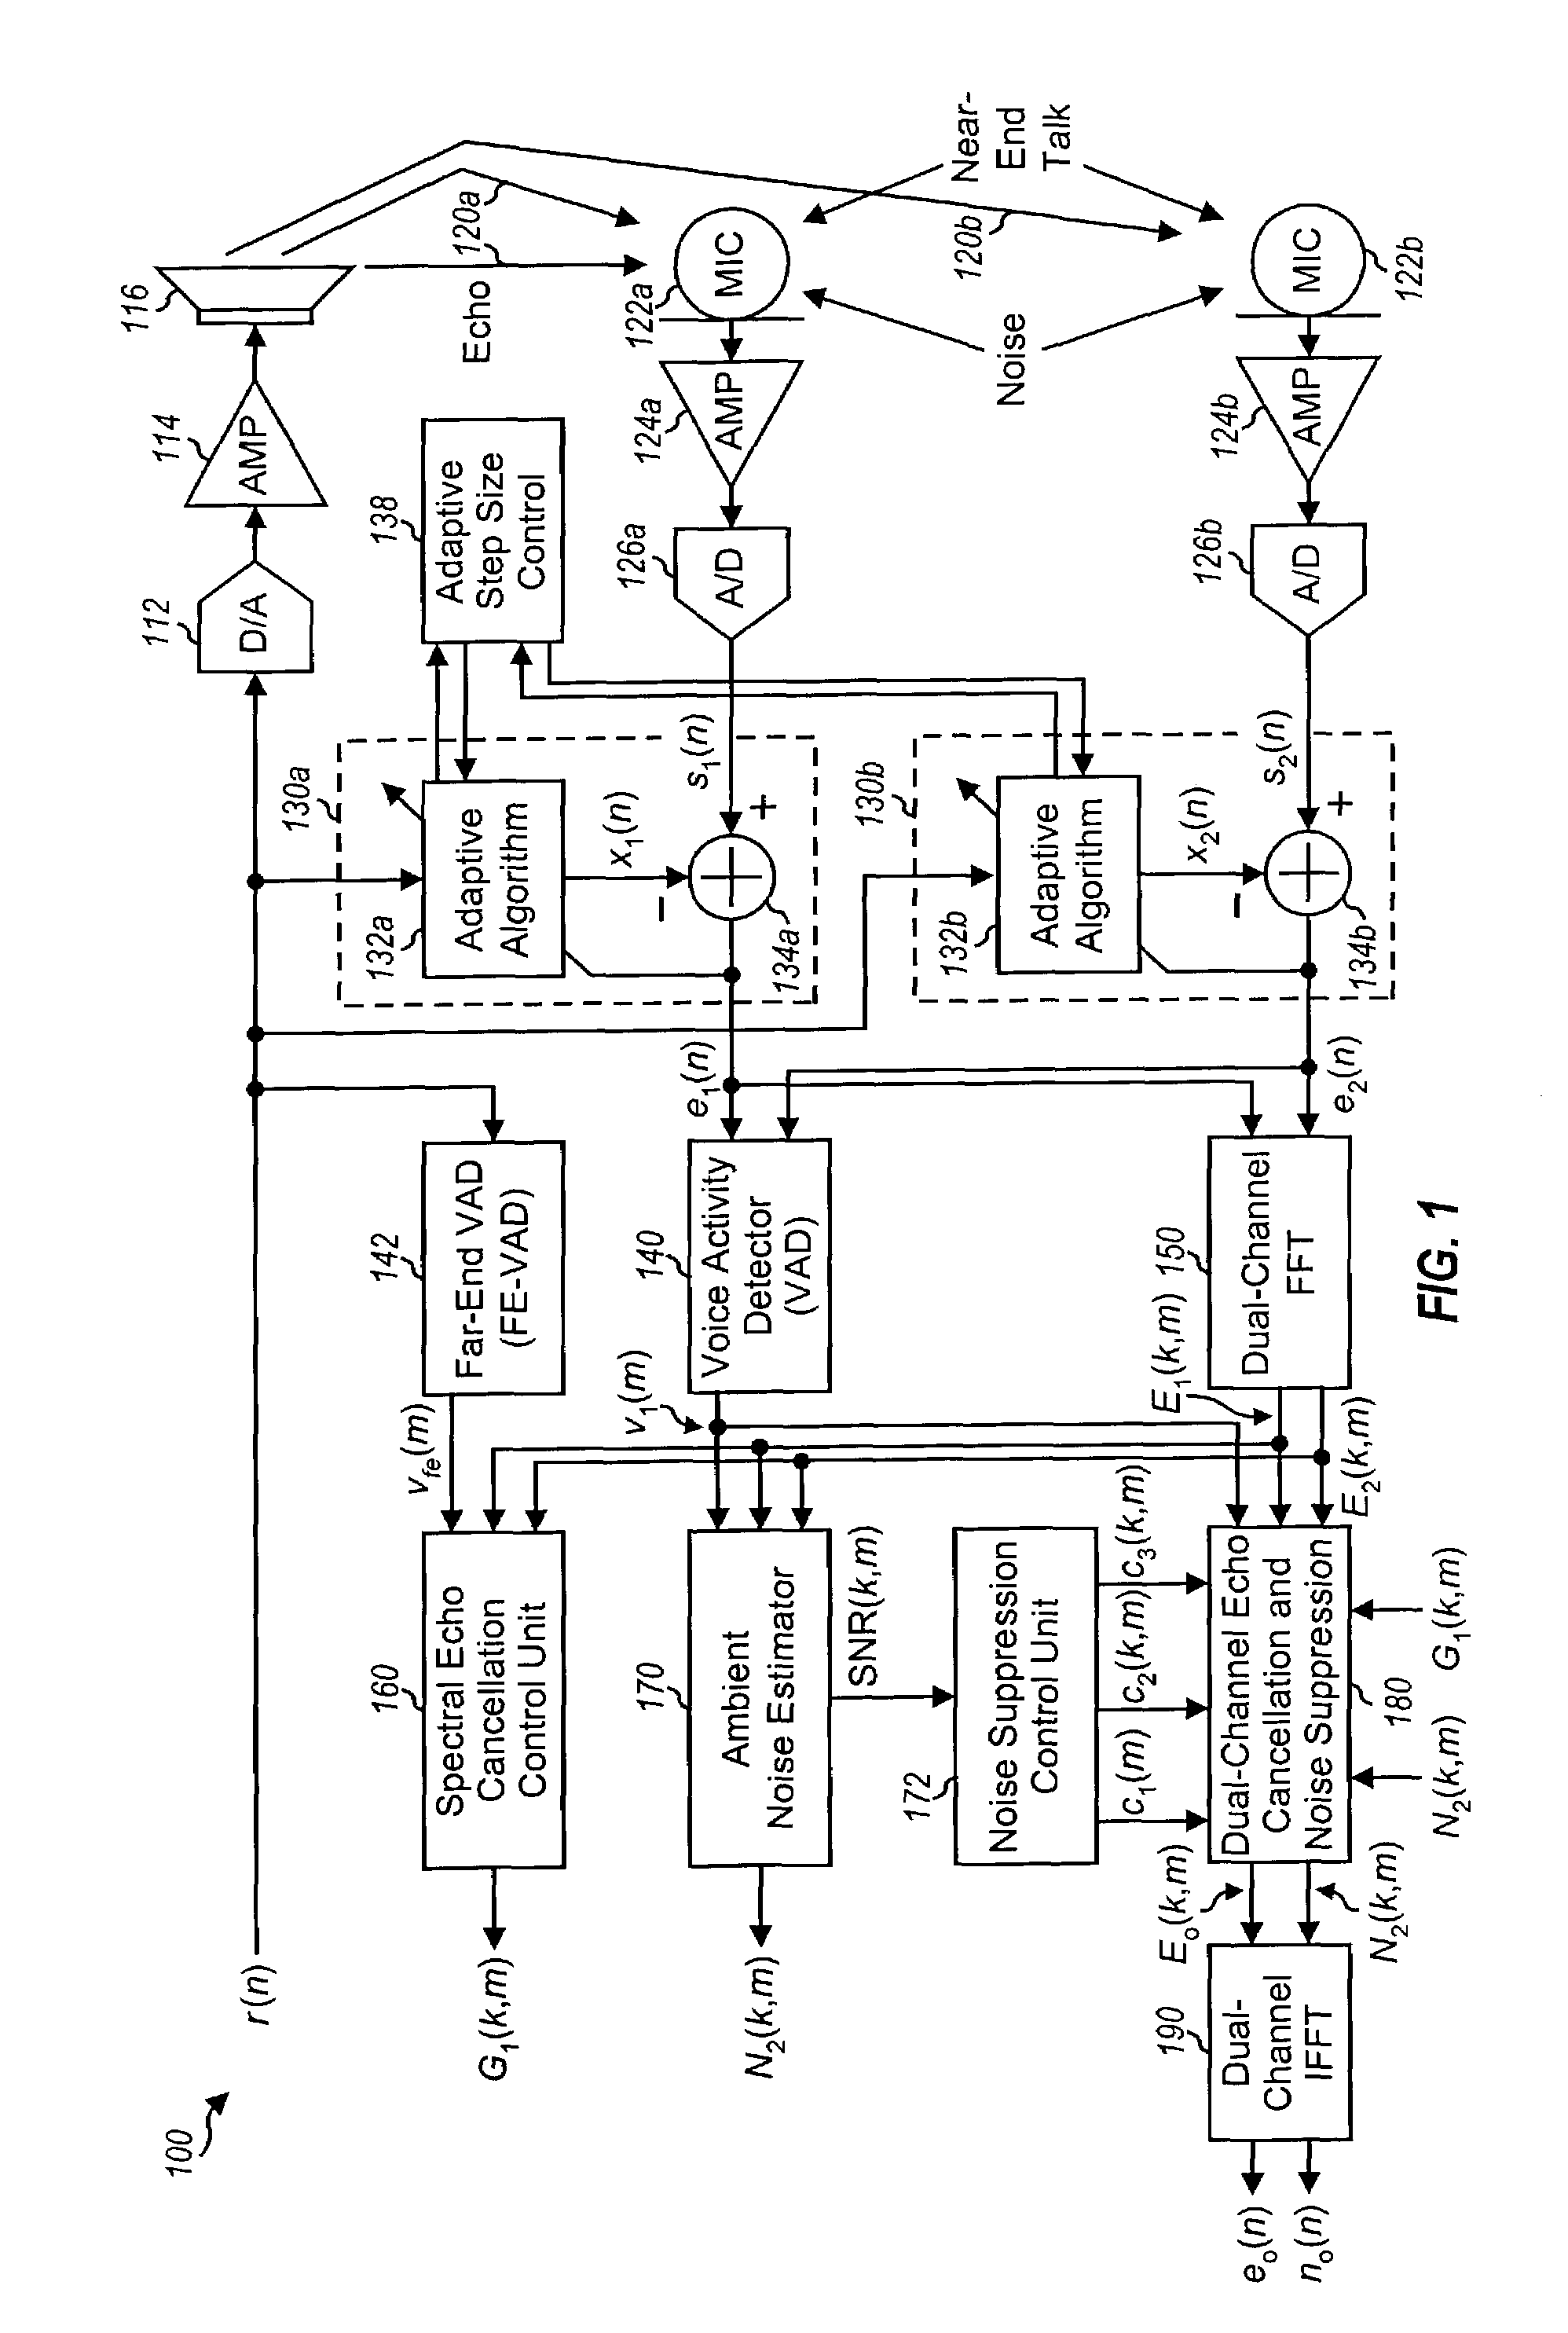 Small array microphone for acoustic echo cancellation and noise suppression